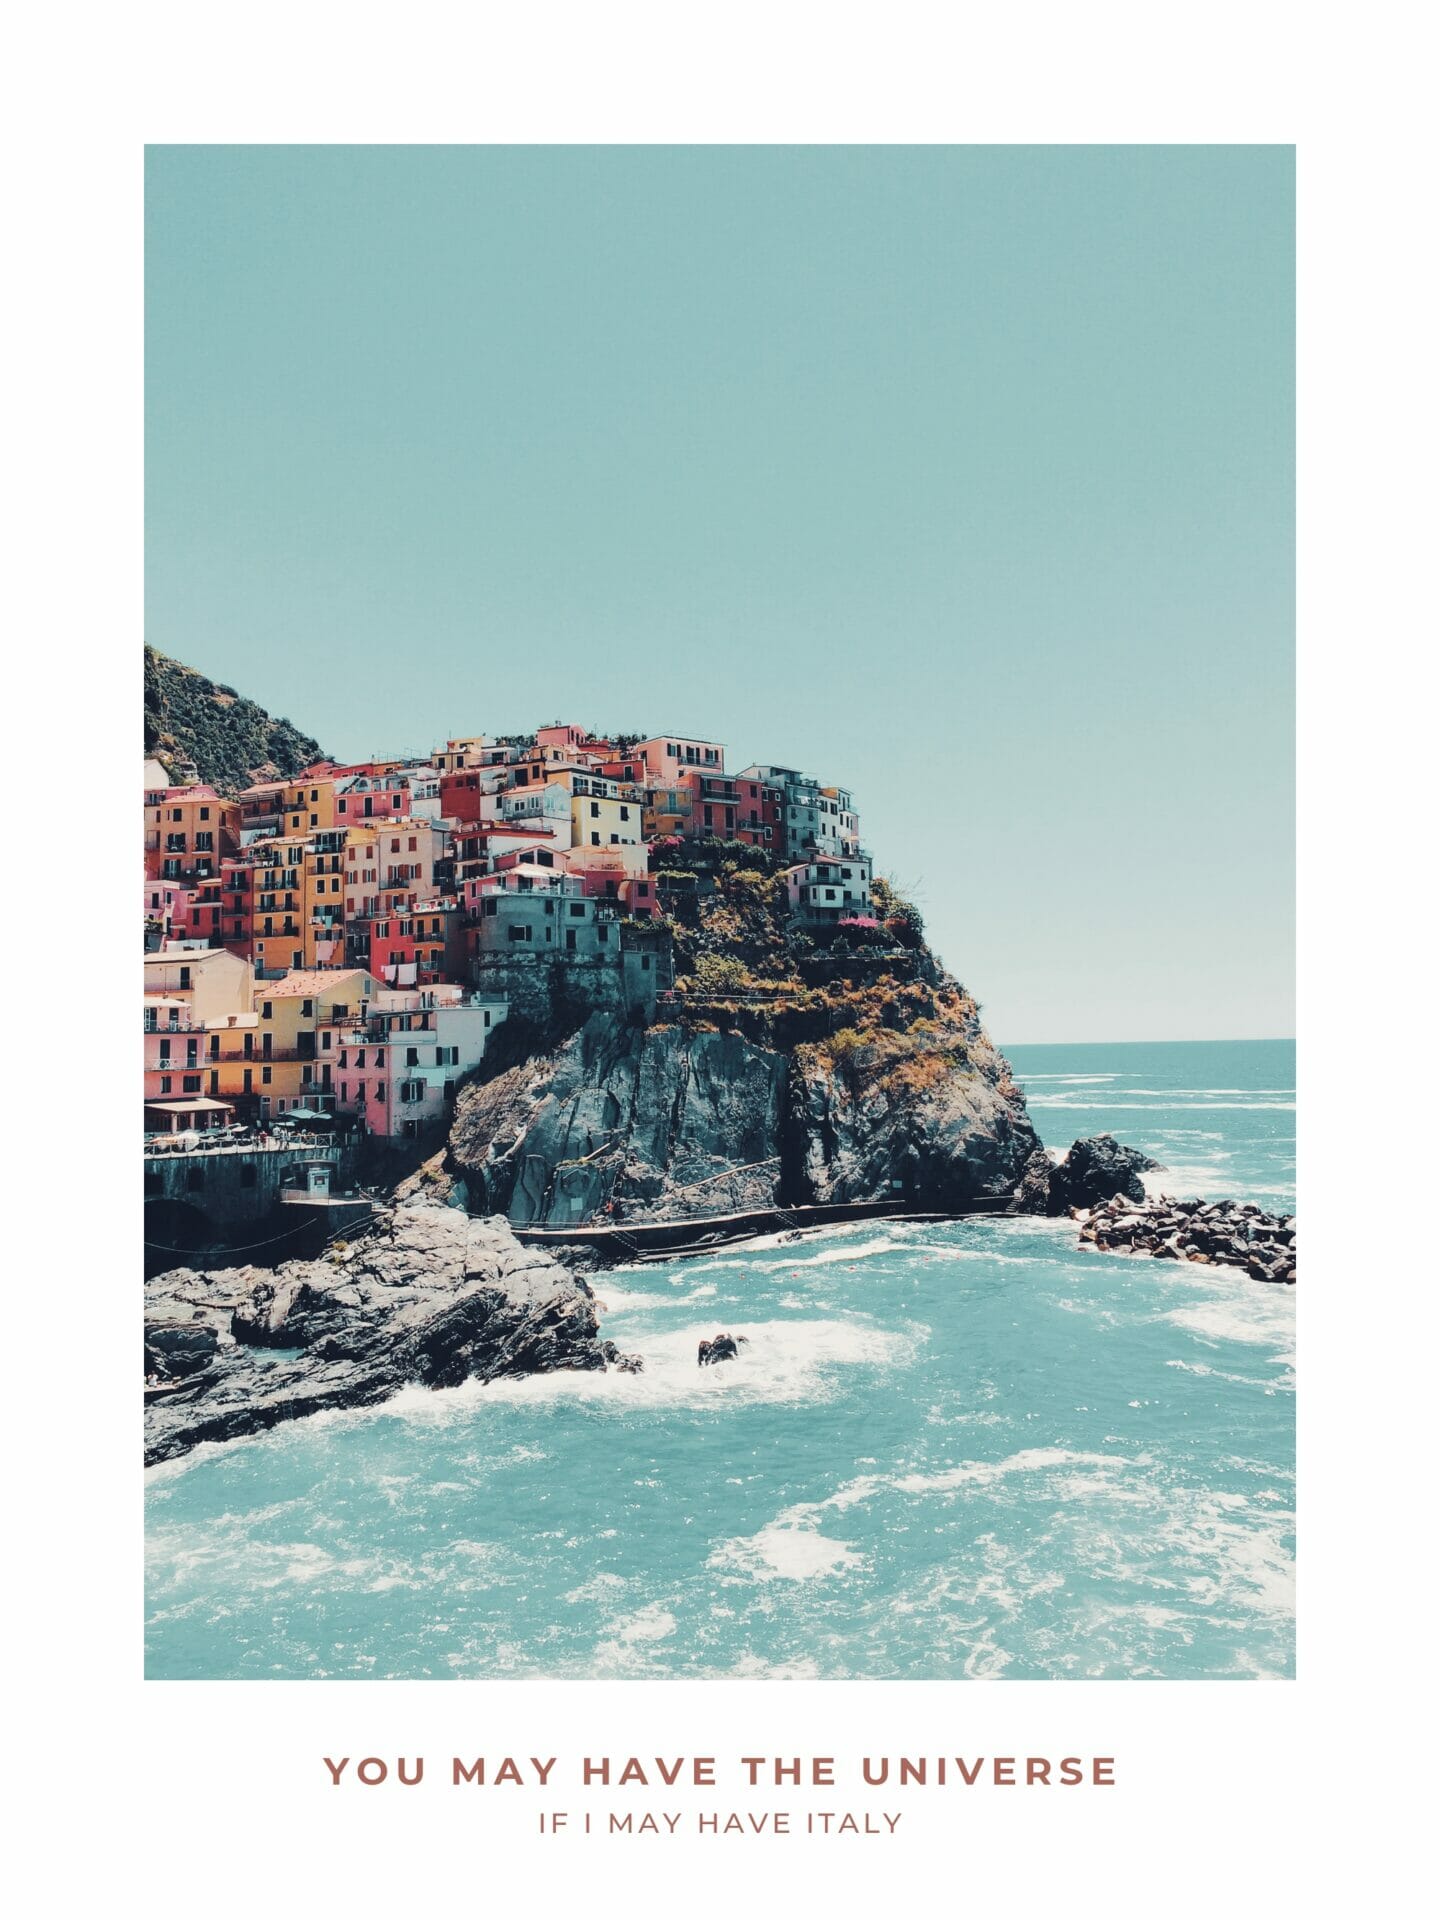 Poster of city of Cinque Terre by the sea